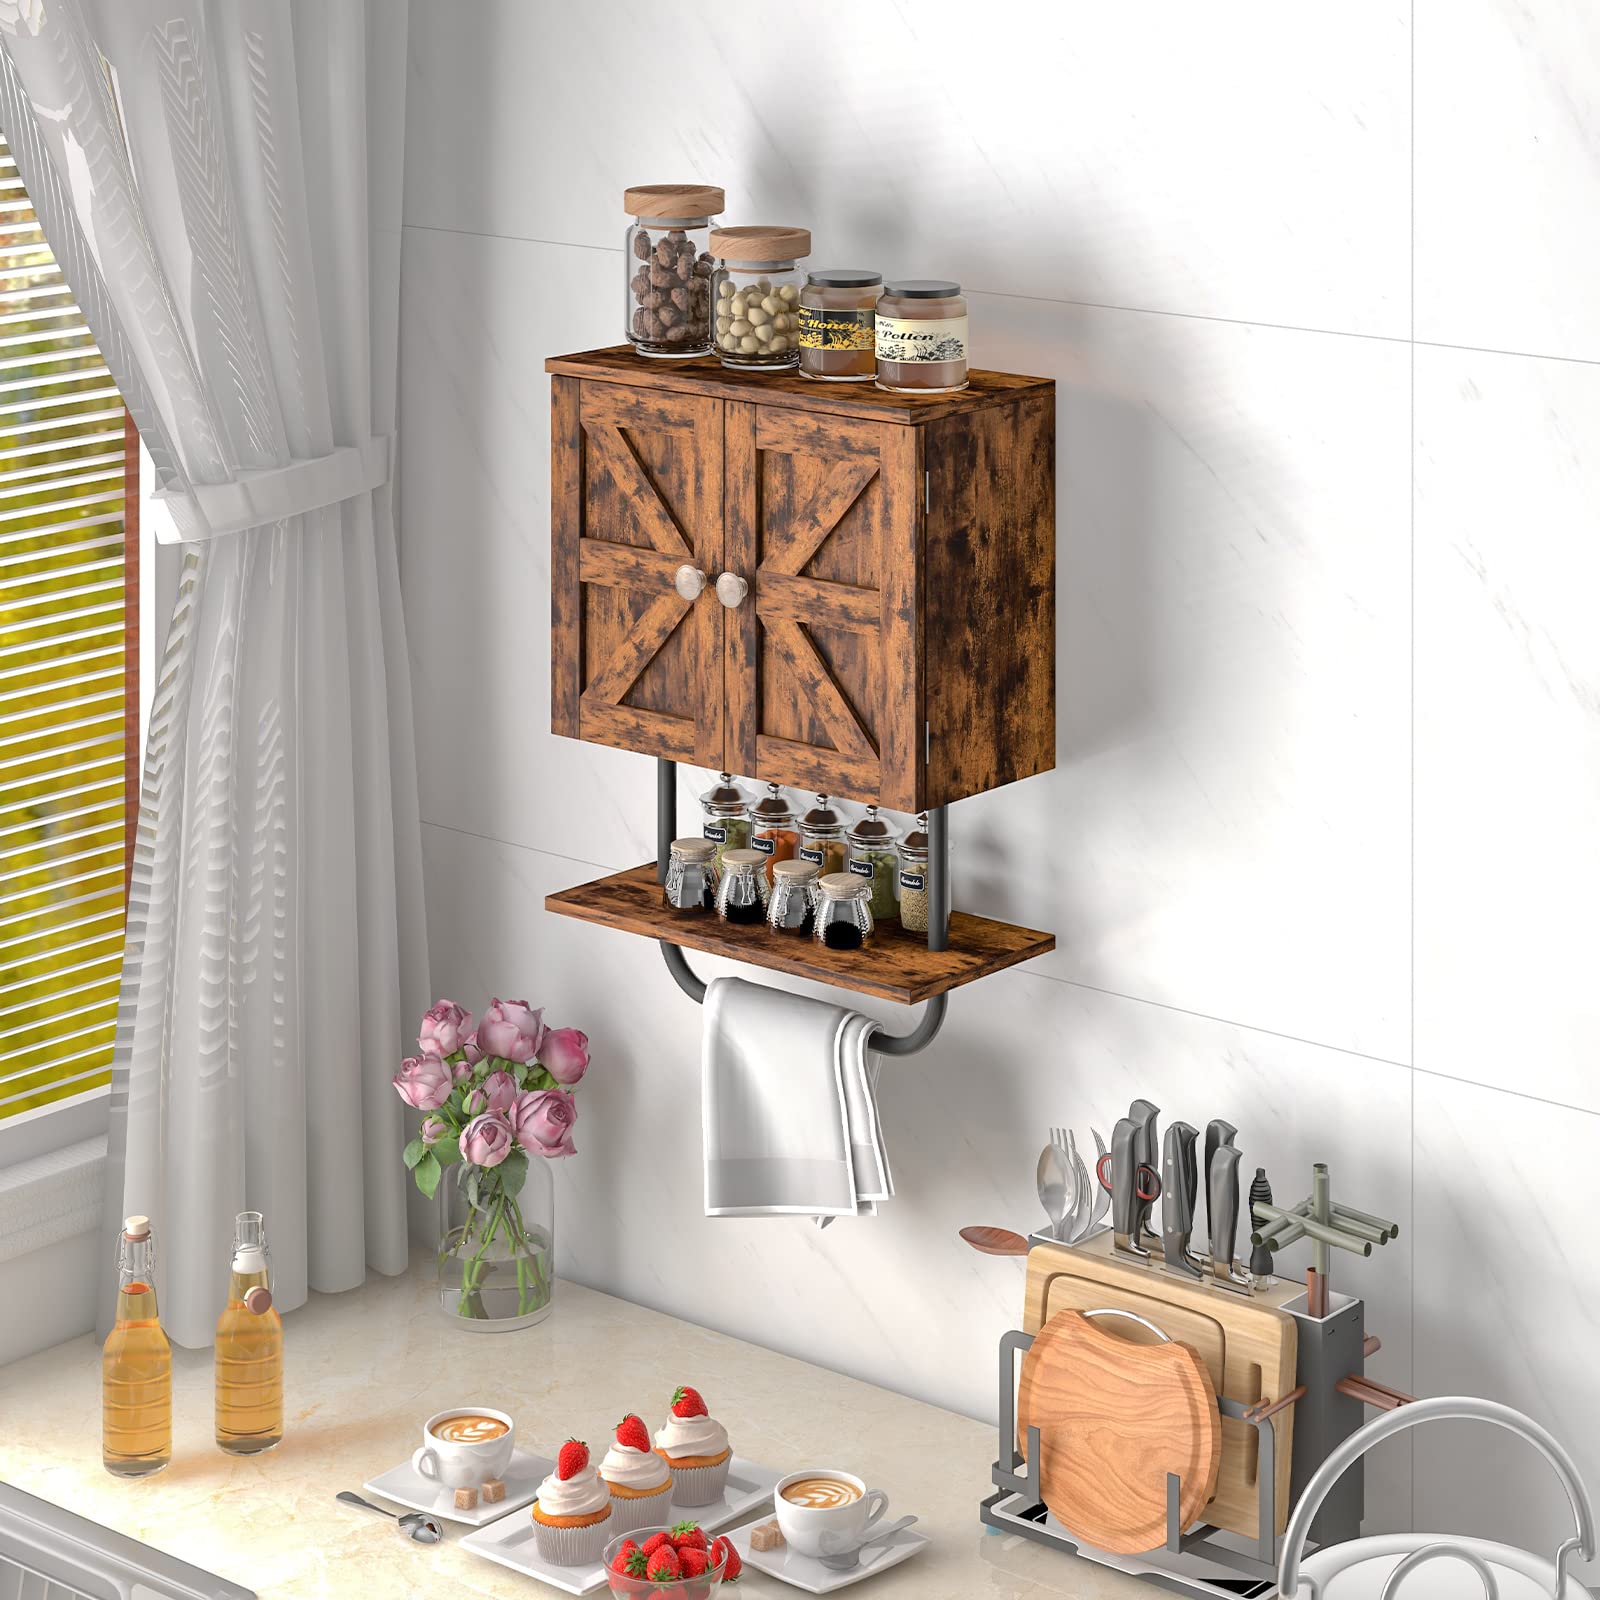 Giantex Bathroom Cabinet Wall Mounted - Medicine Cabinet with Double Doors, Above Toilet Storage Cabinet